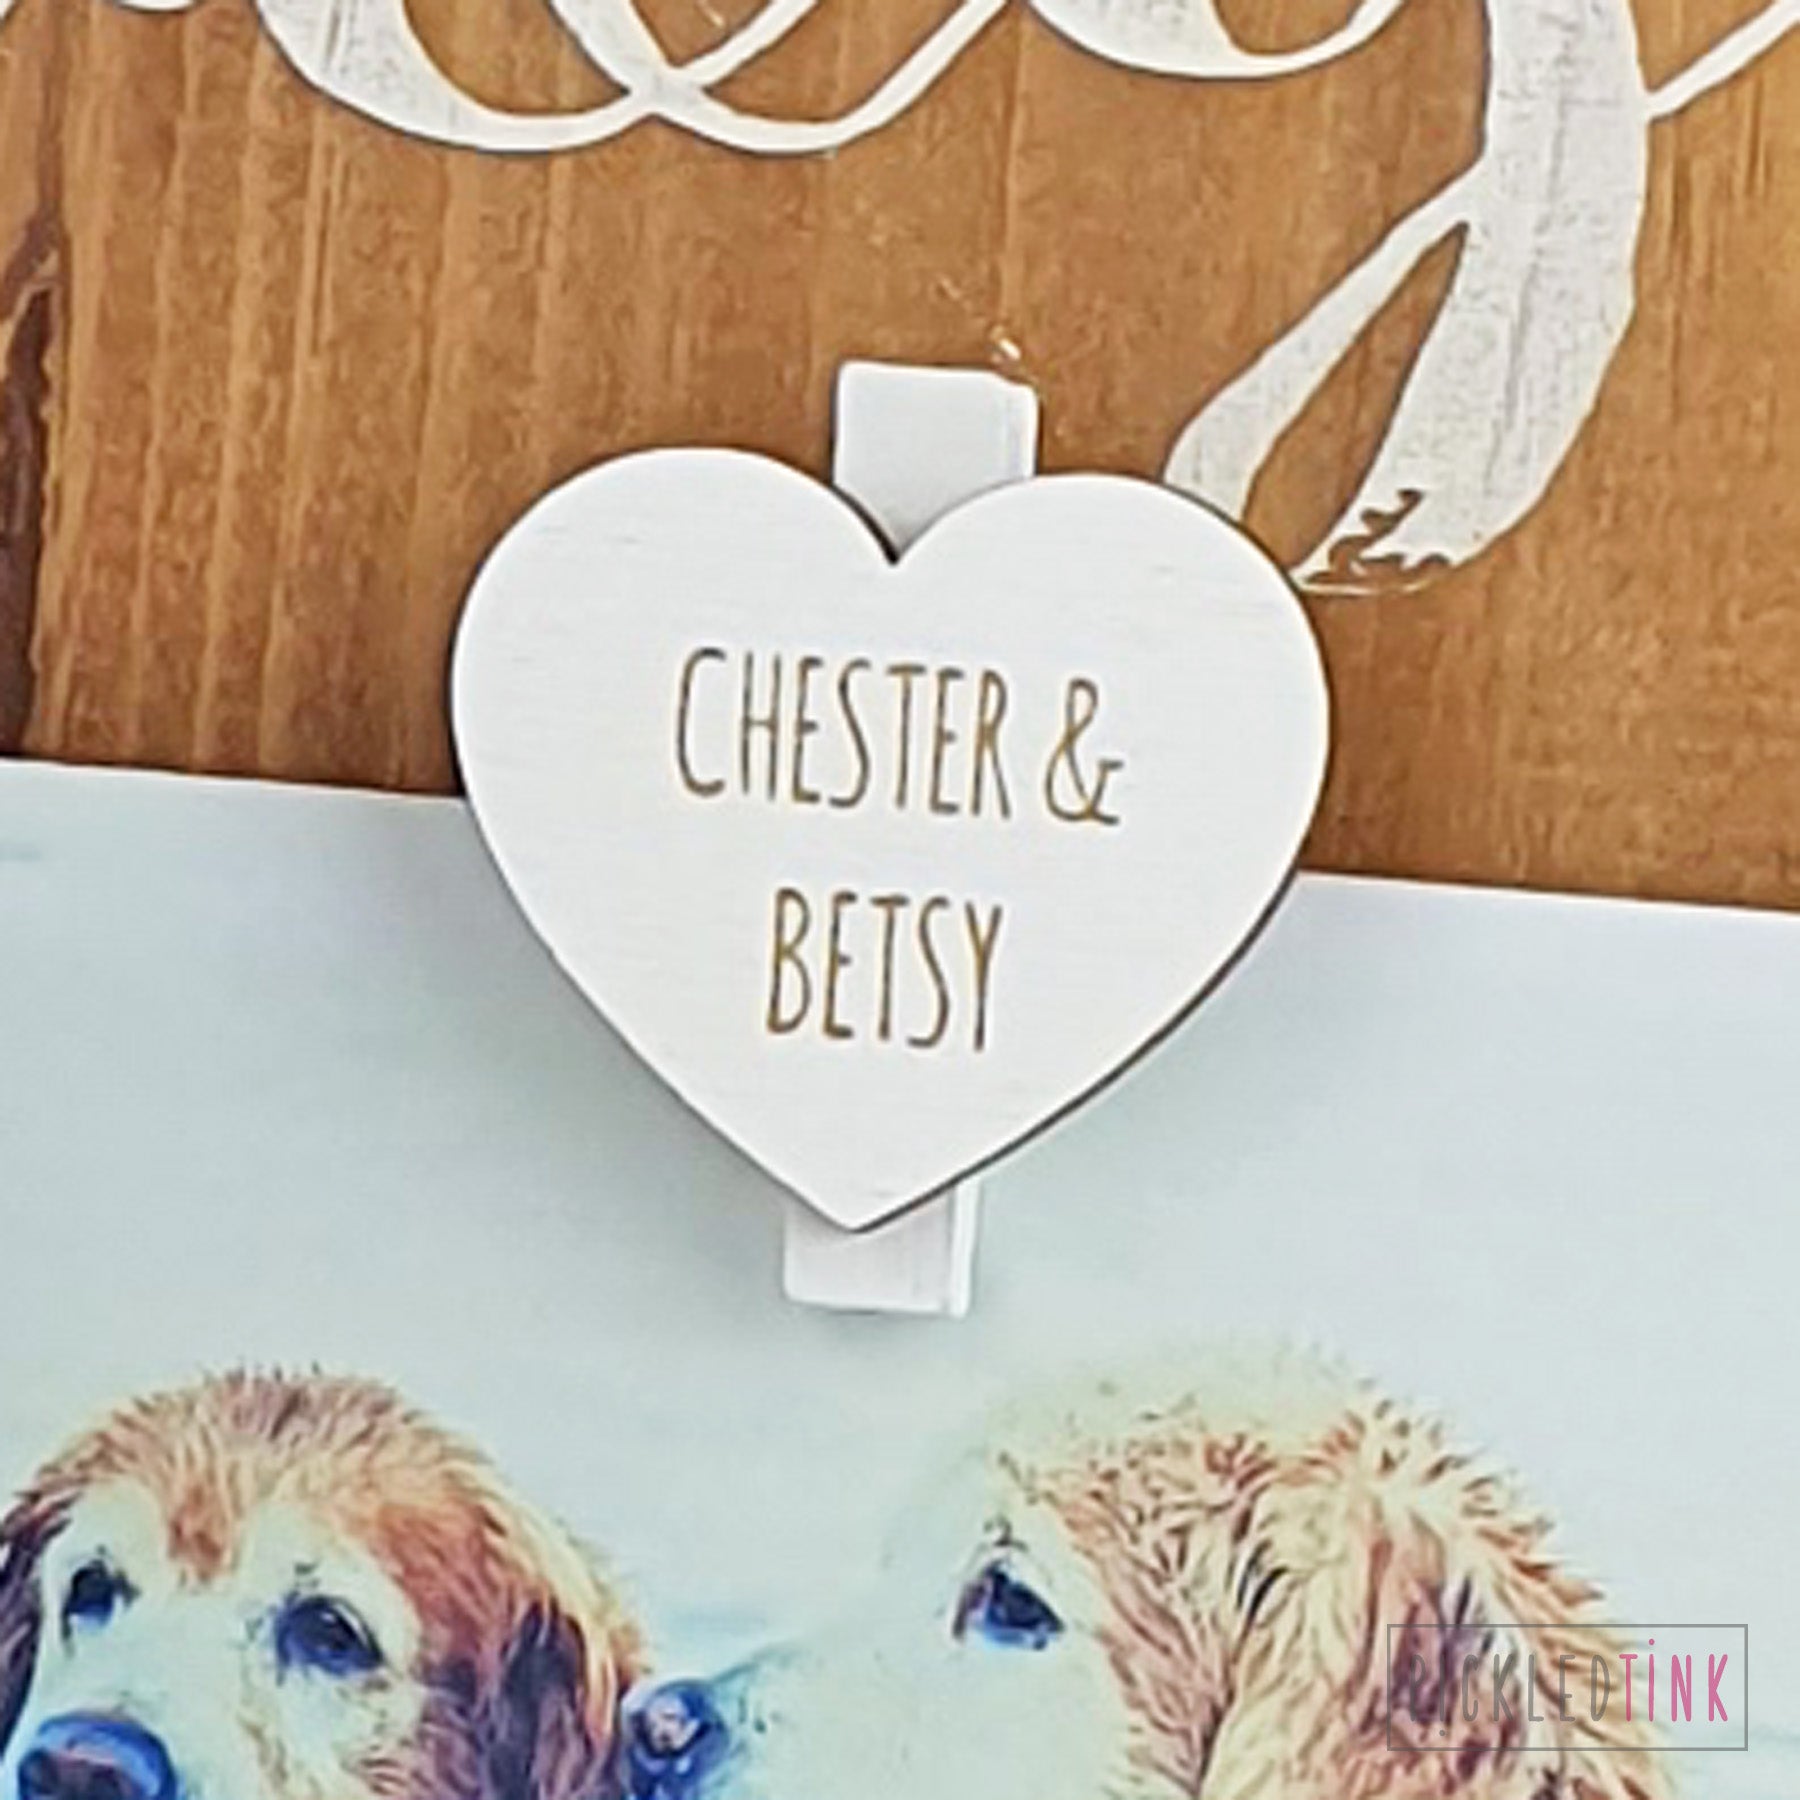 A house is not a home without a dog - Peg Photo Frame